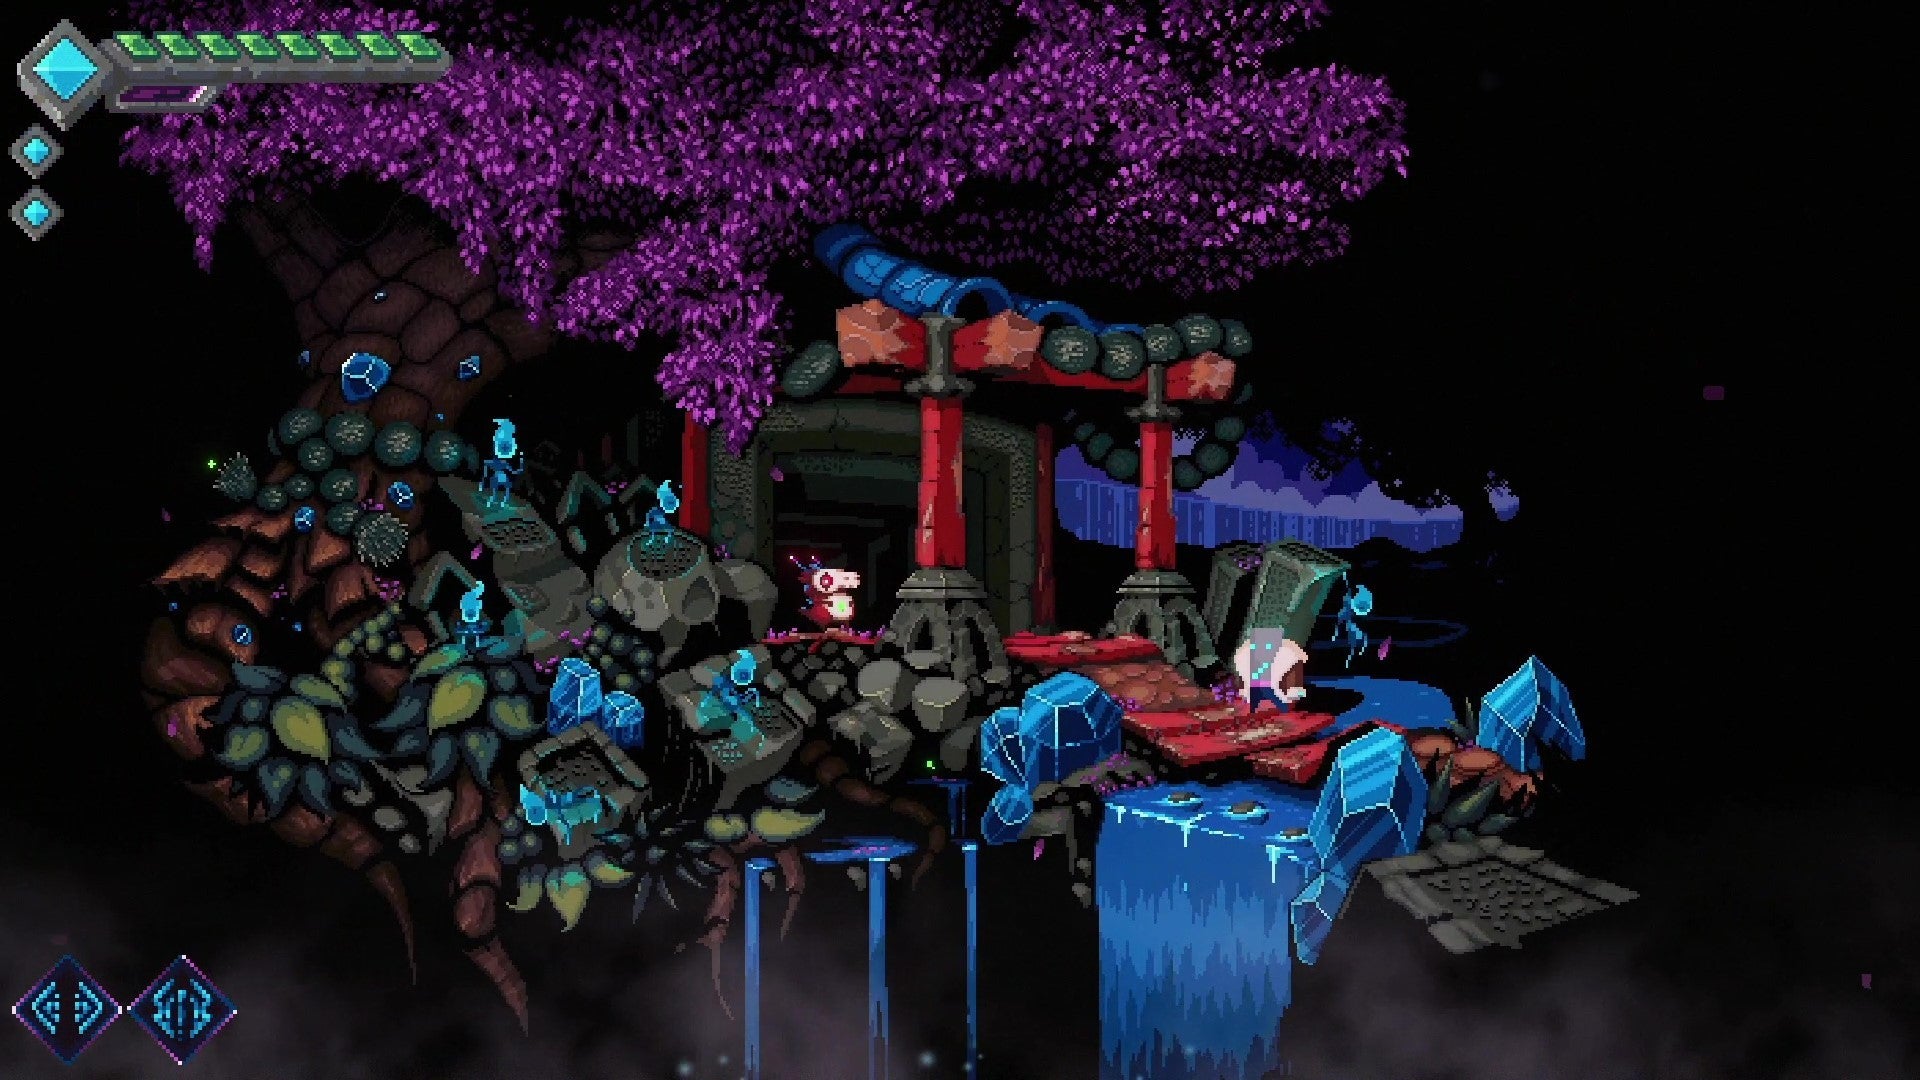 A warrior in a fur coat stands on a bridge next to a Japanese-style torii gate in a forest scene in Lucid.